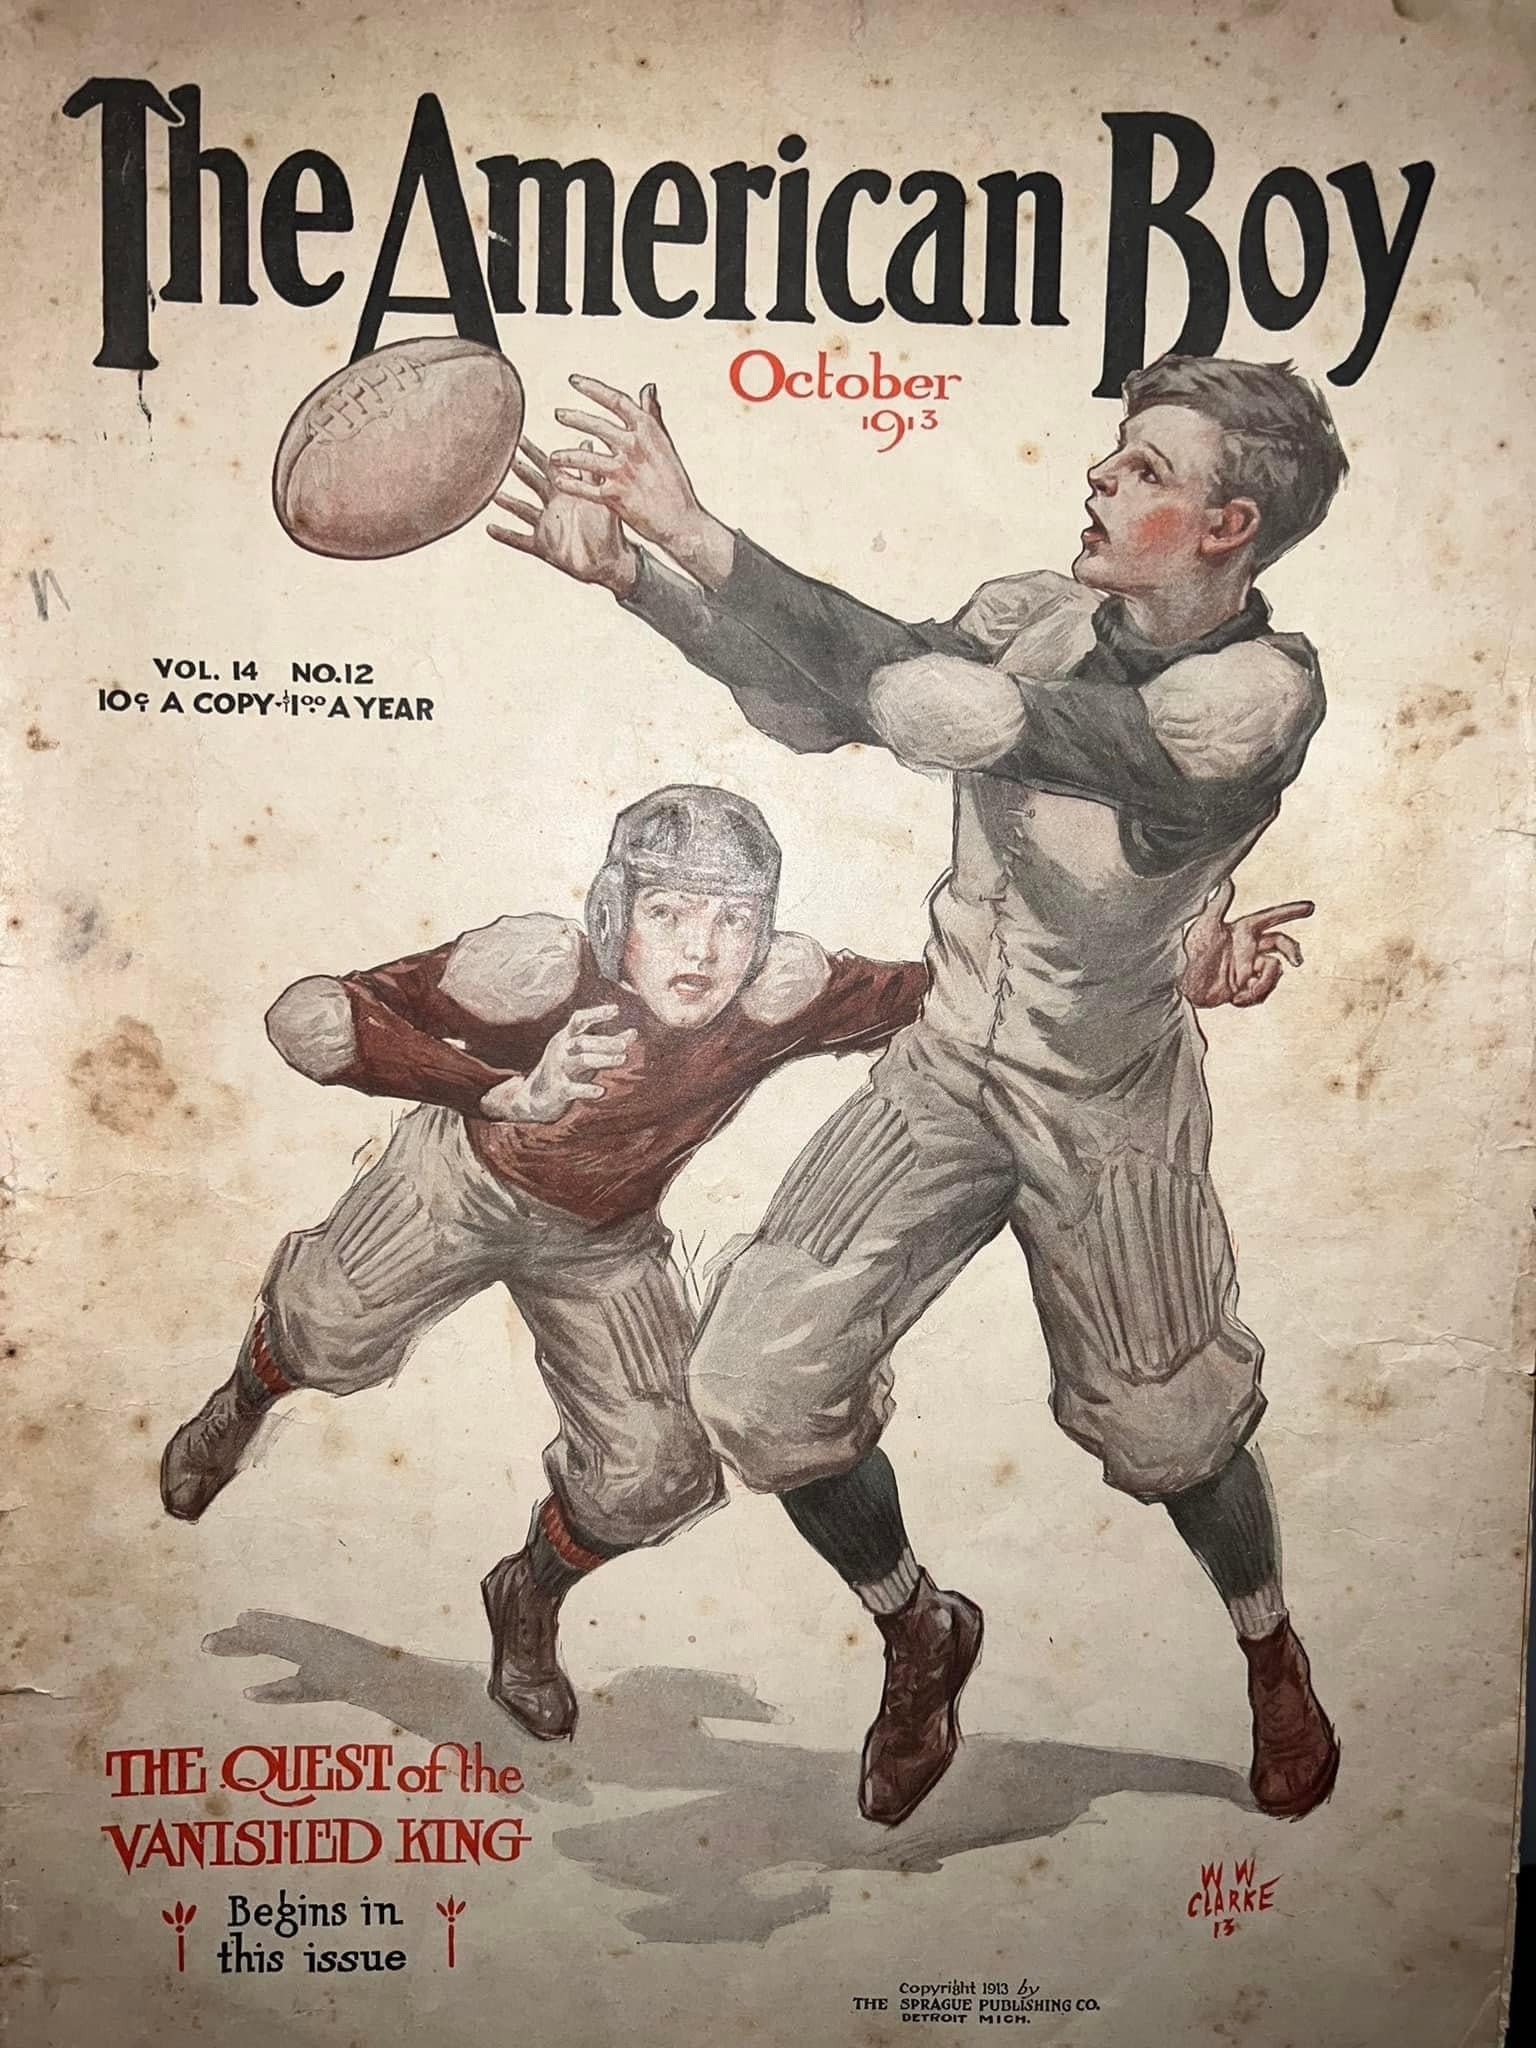 Antique magazine 1913 the American boy October Great early football cover sports early advertising